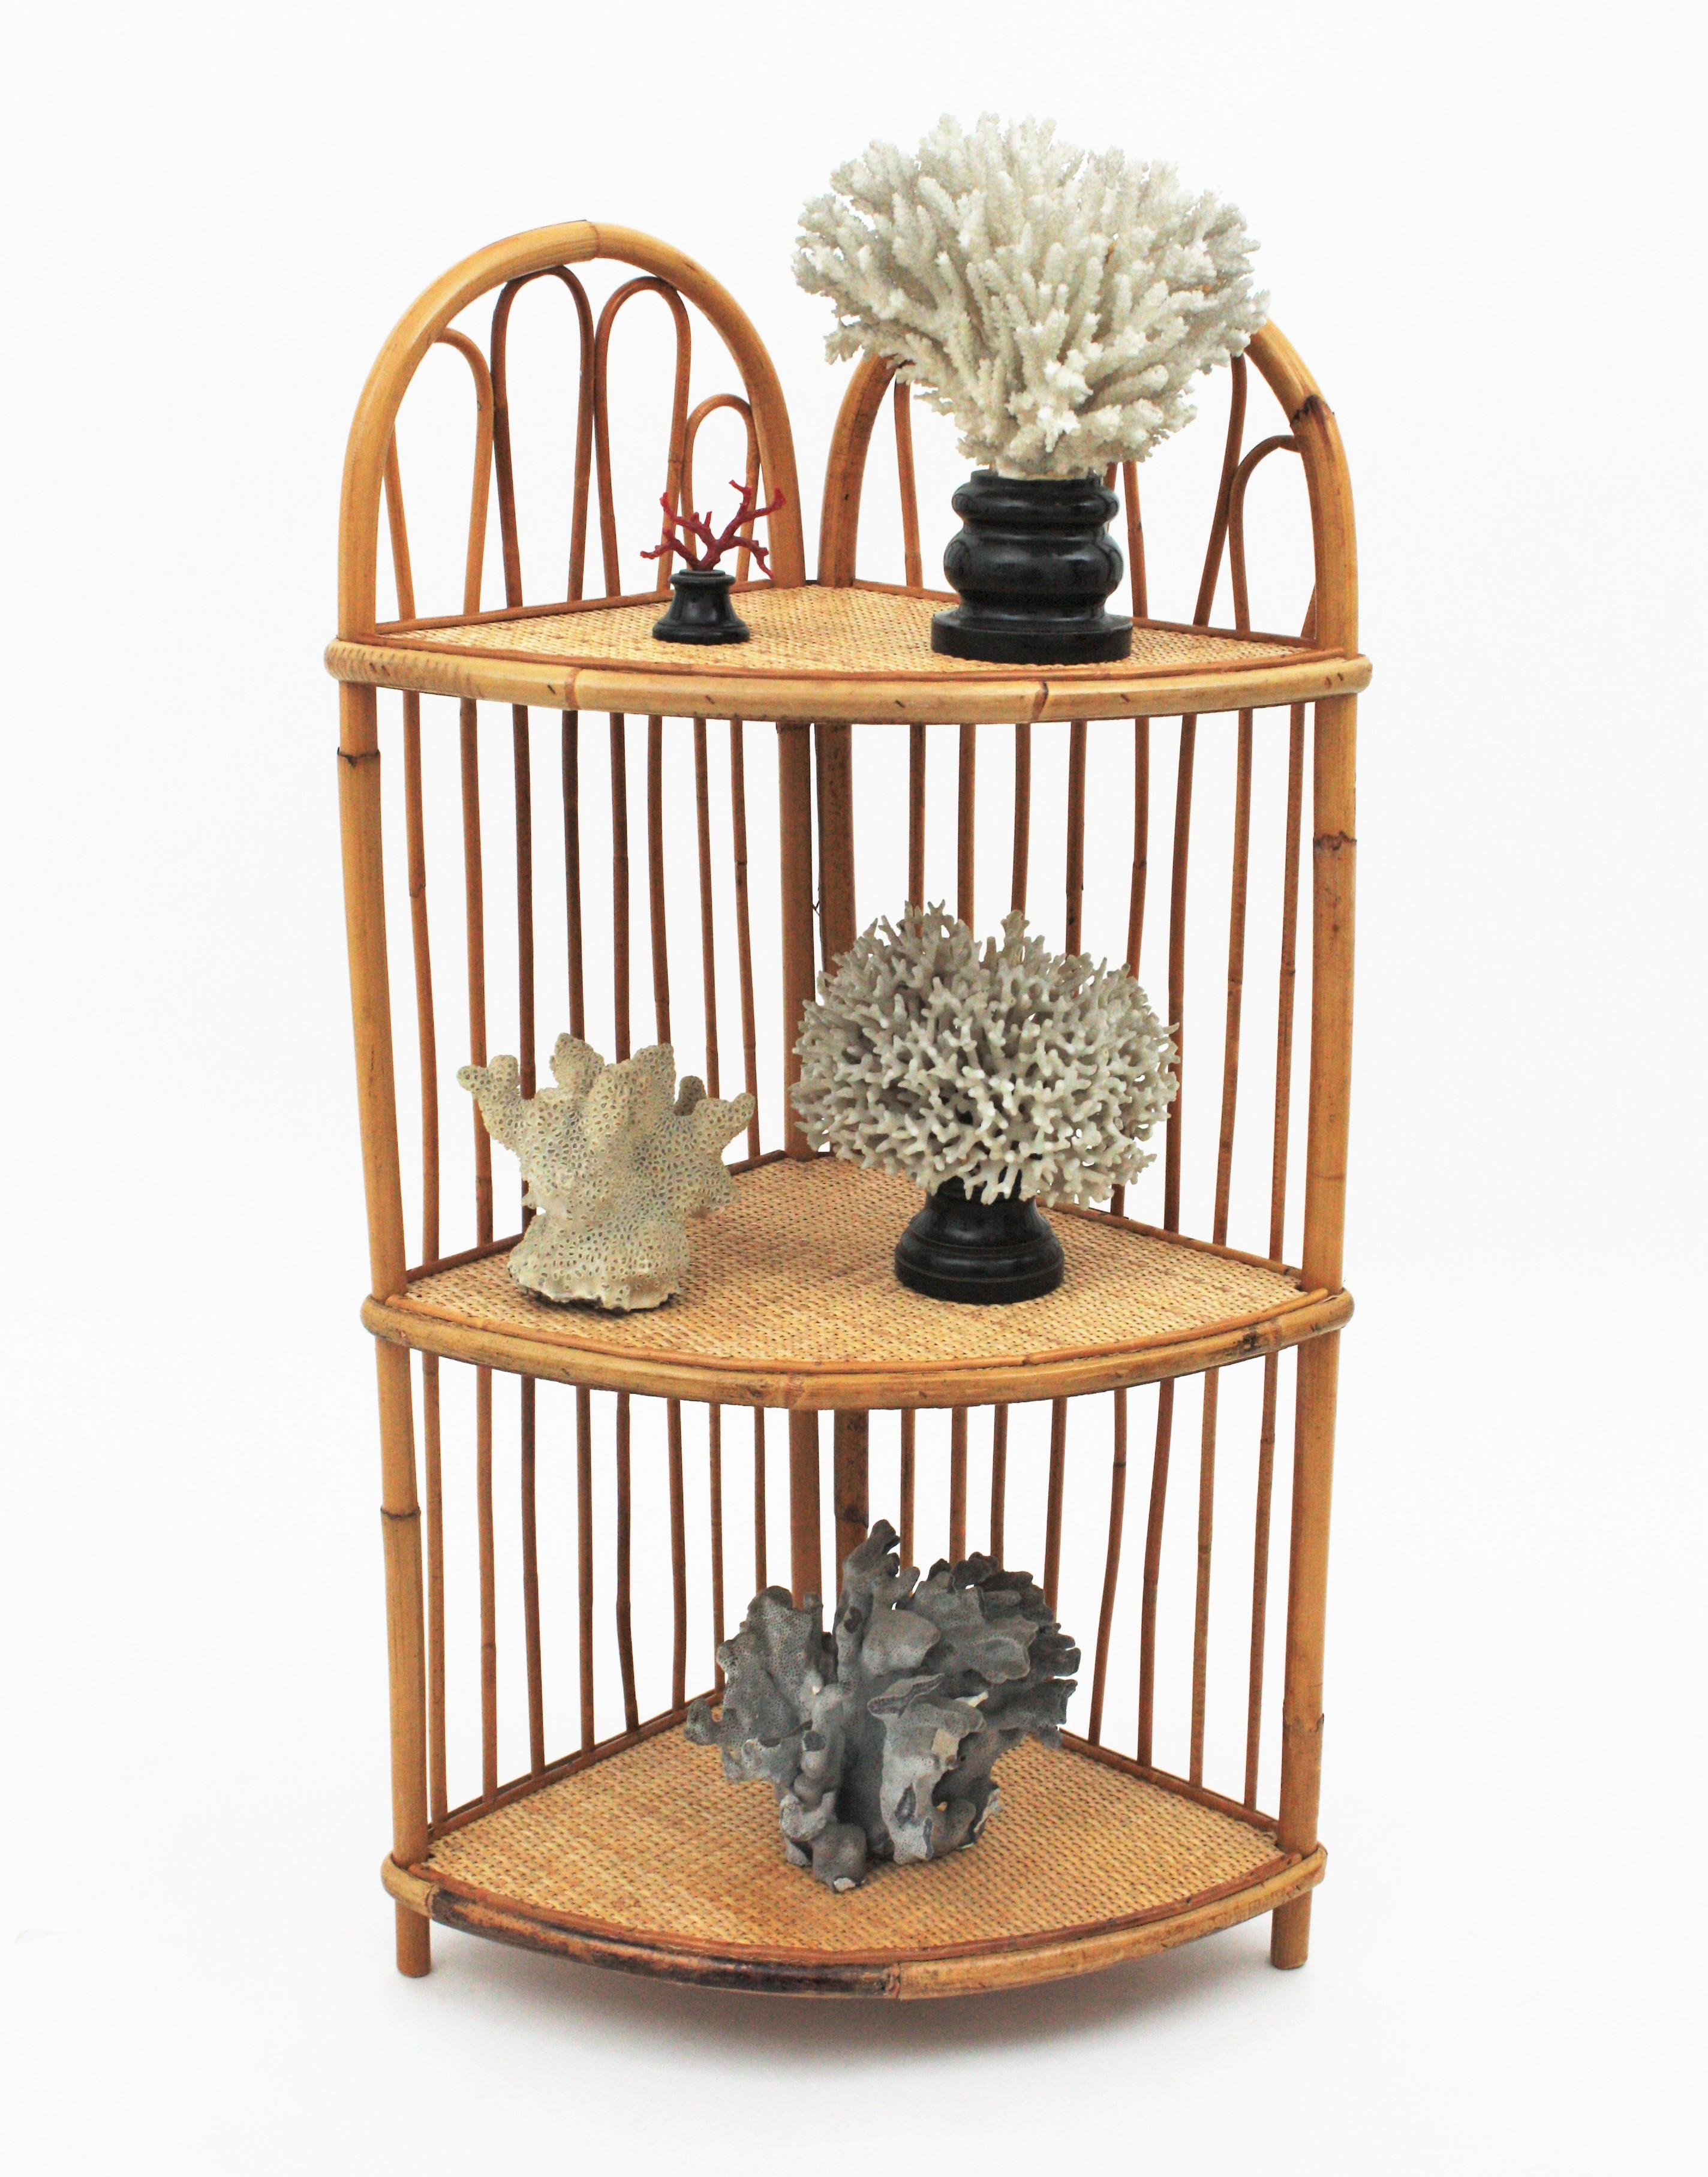 Eye-catching corner wall hanging or floor shelf / stand in bamboo and rattan, Spain, 1960s.
This étagère has 3 shelves covered with rattan wire. The structures is made in bamboo with rattan decorative accents at both sides. To be placed in a corner